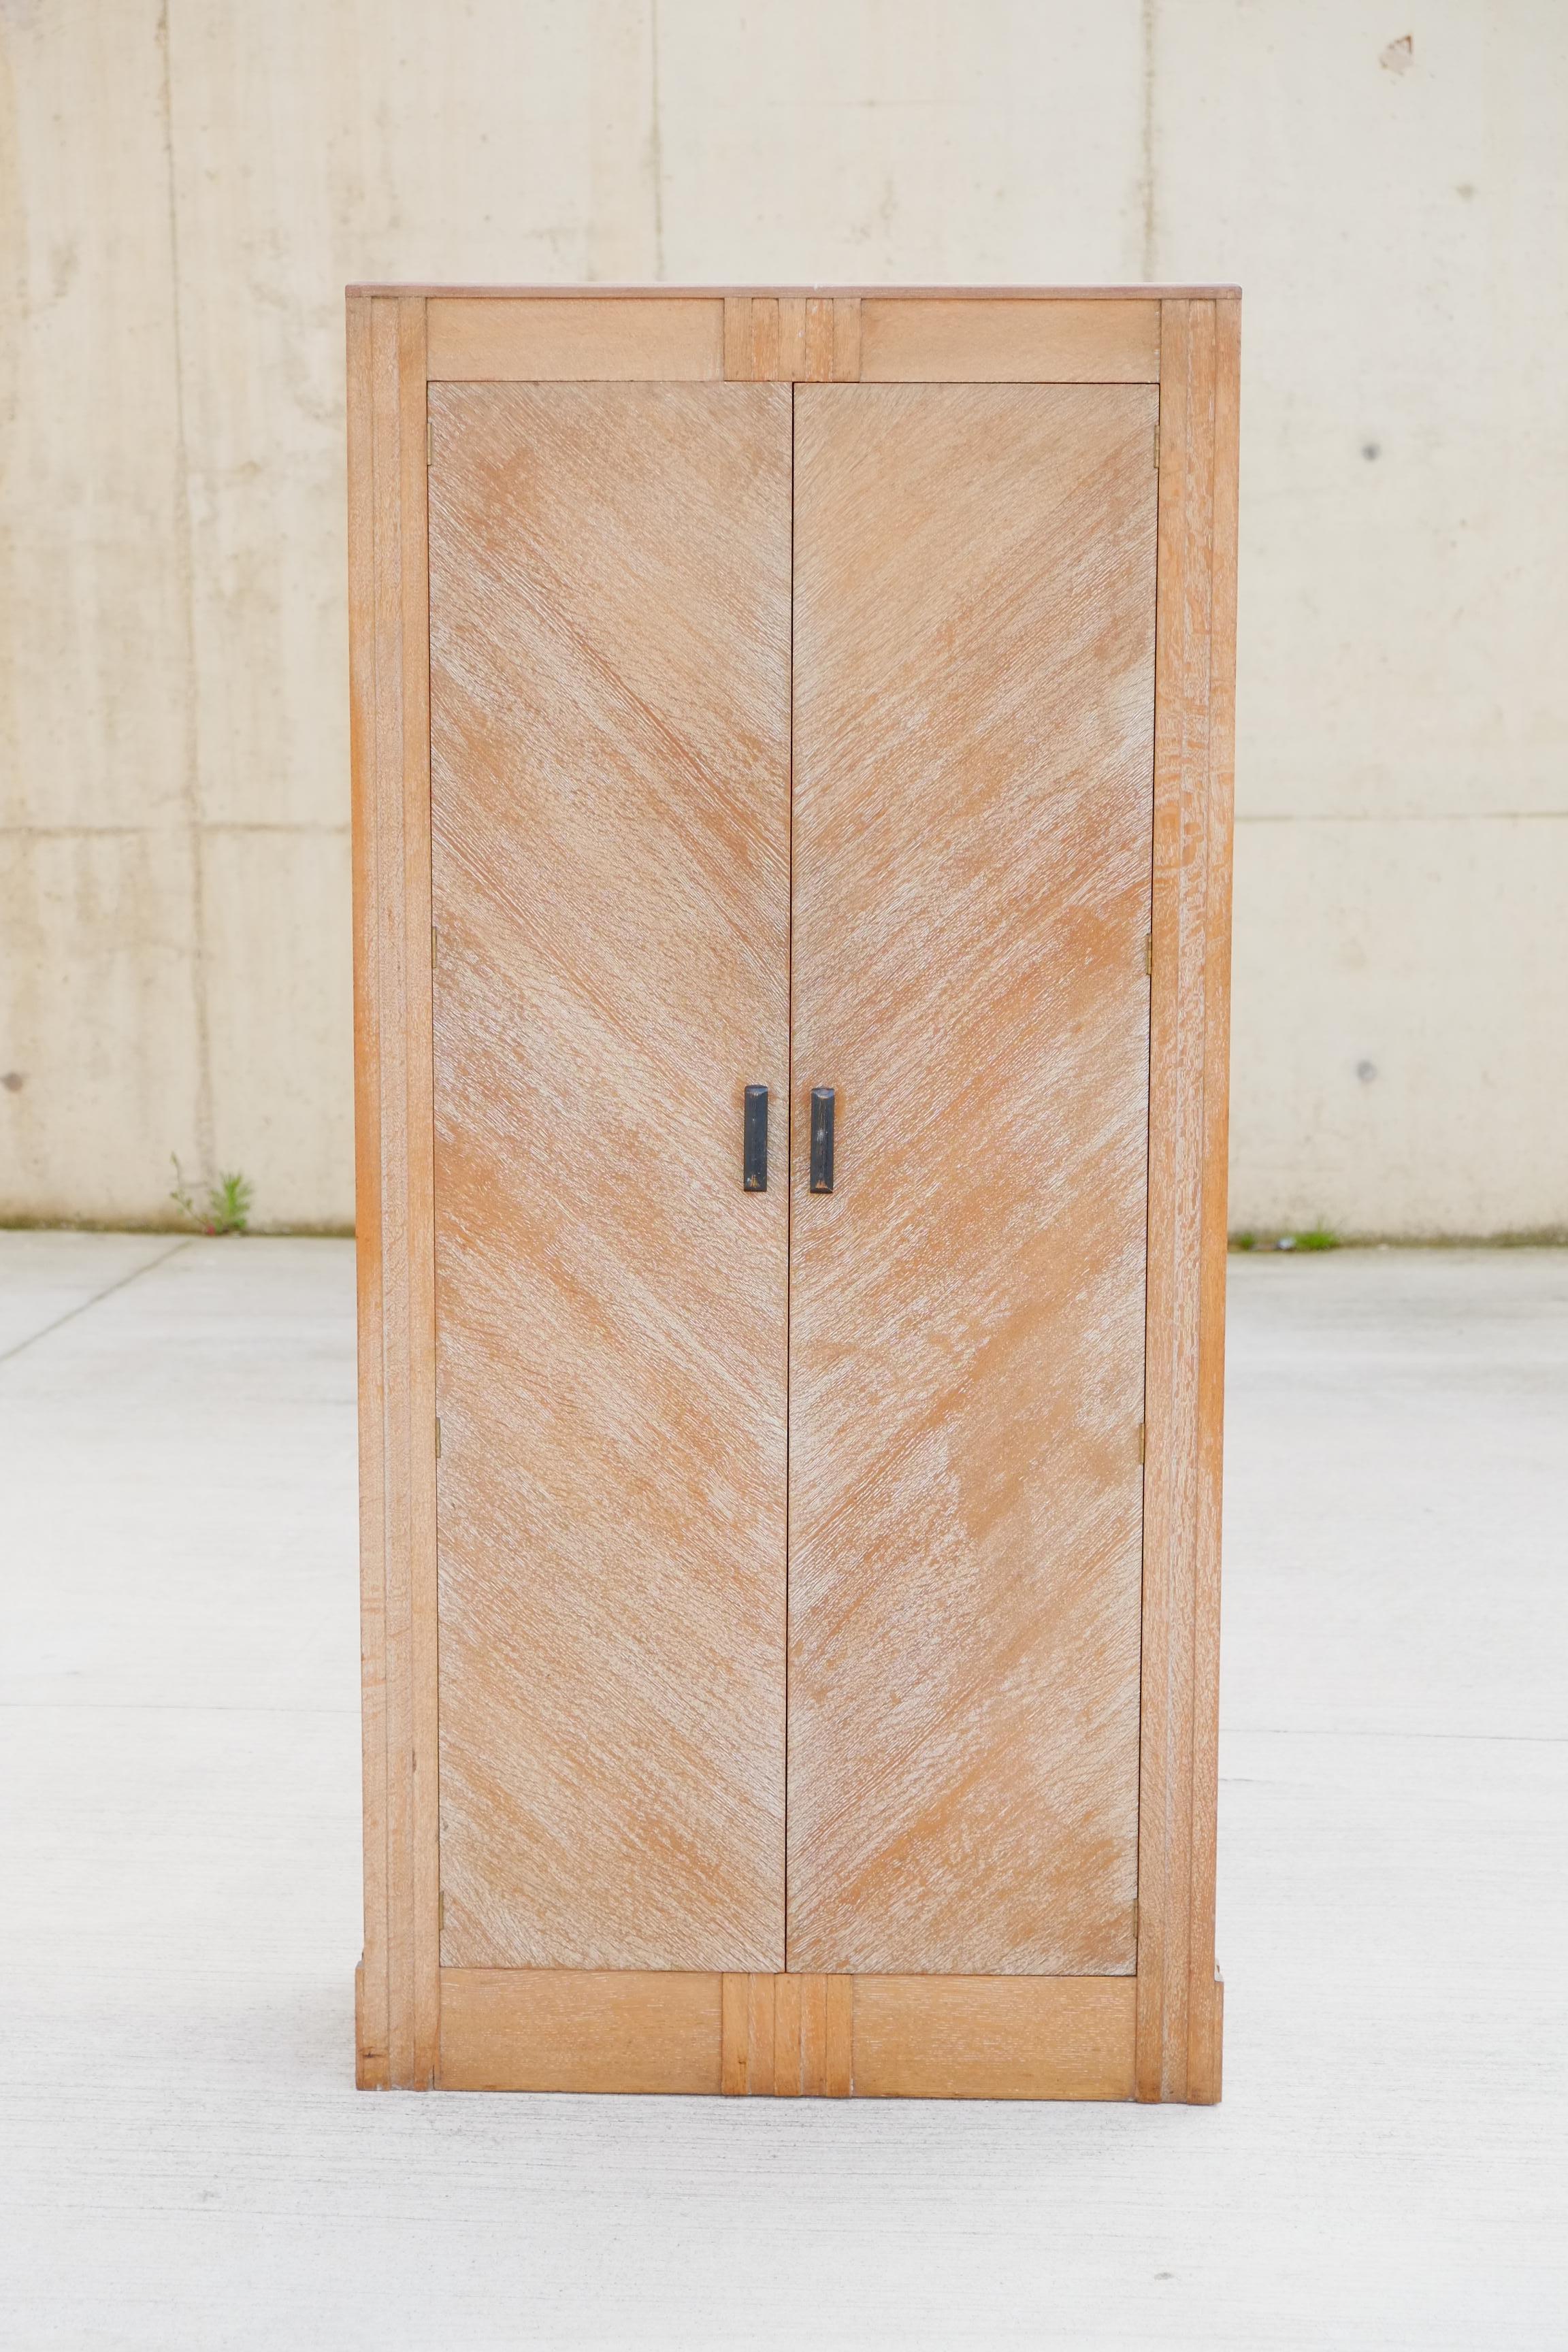 Stunning Art Deco wardrobe by English cabinet makers called; Hypnos. The wardrobe is made of solid oak with a lime wax finish. The Oak doors are stunning with a diagonal design. Subtle Art Deco decoration throughout. Beautiful colour and patina.